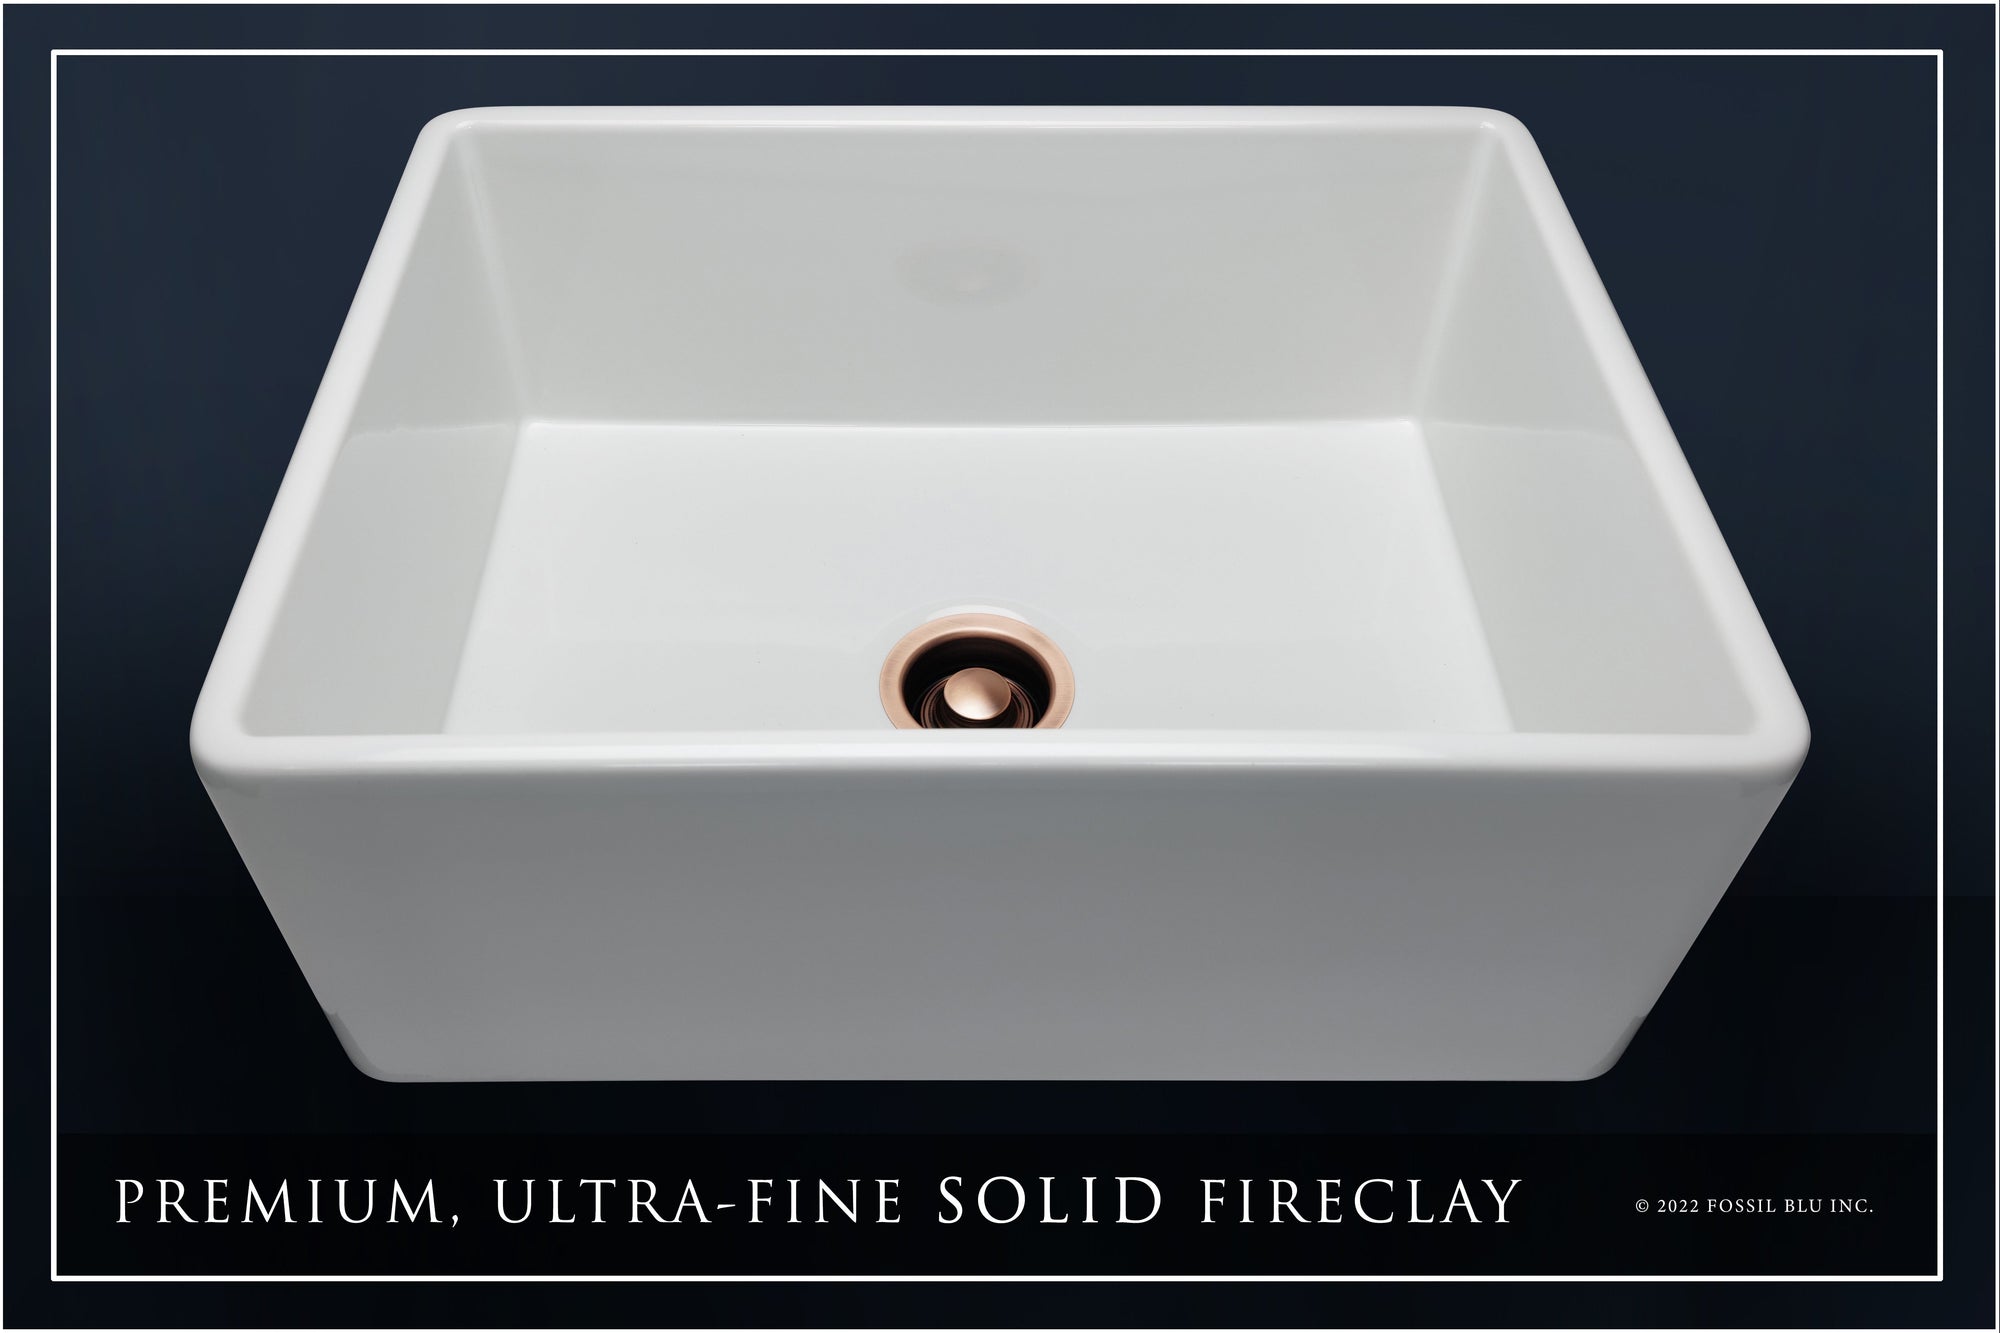 FSW1000AC LUXURY 26-INCH SOLID FIRECLAY FARMHOUSE SINK IN WHITE, ANTIQUE COPPER ACCS, FLAT FRONT